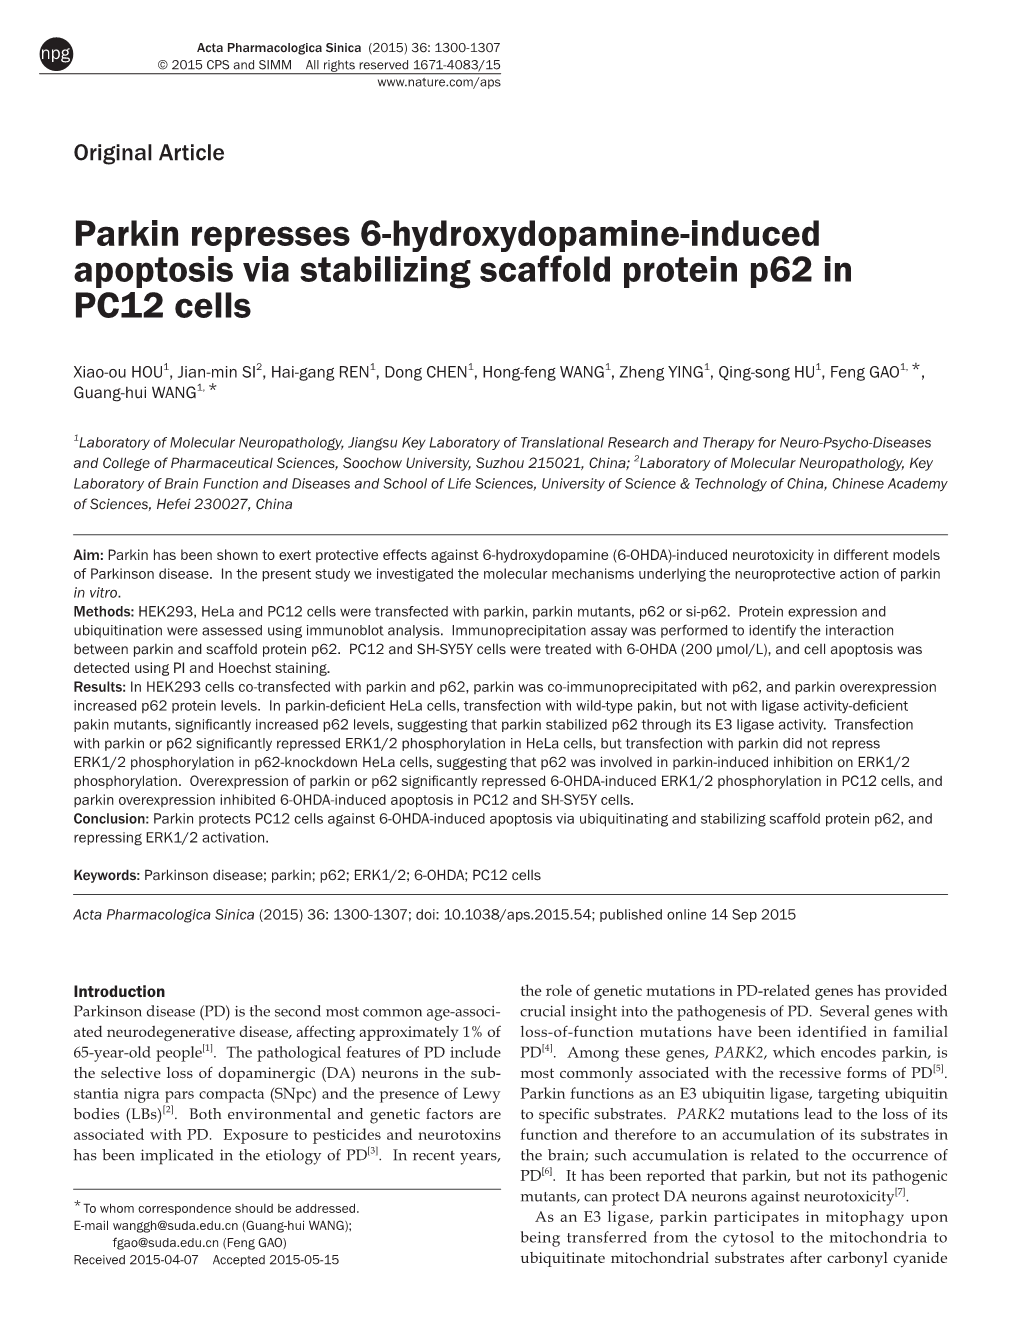 Parkin Represses 6-Hydroxydopamine-Induced Apoptosis Via Stabilizing Scaffold Protein P62 in PC12 Cells